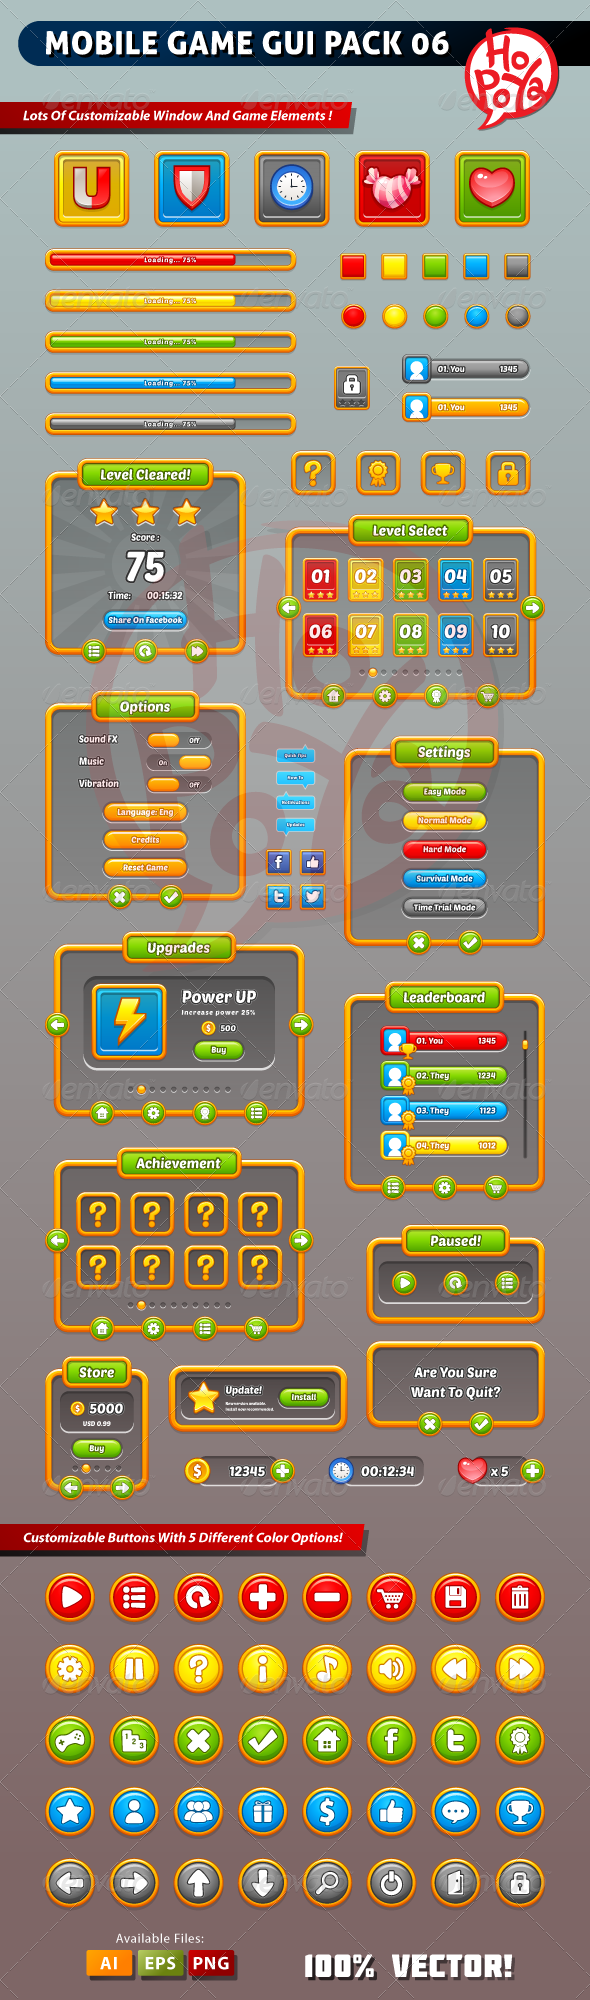 Mobile Game GUI Pack 06